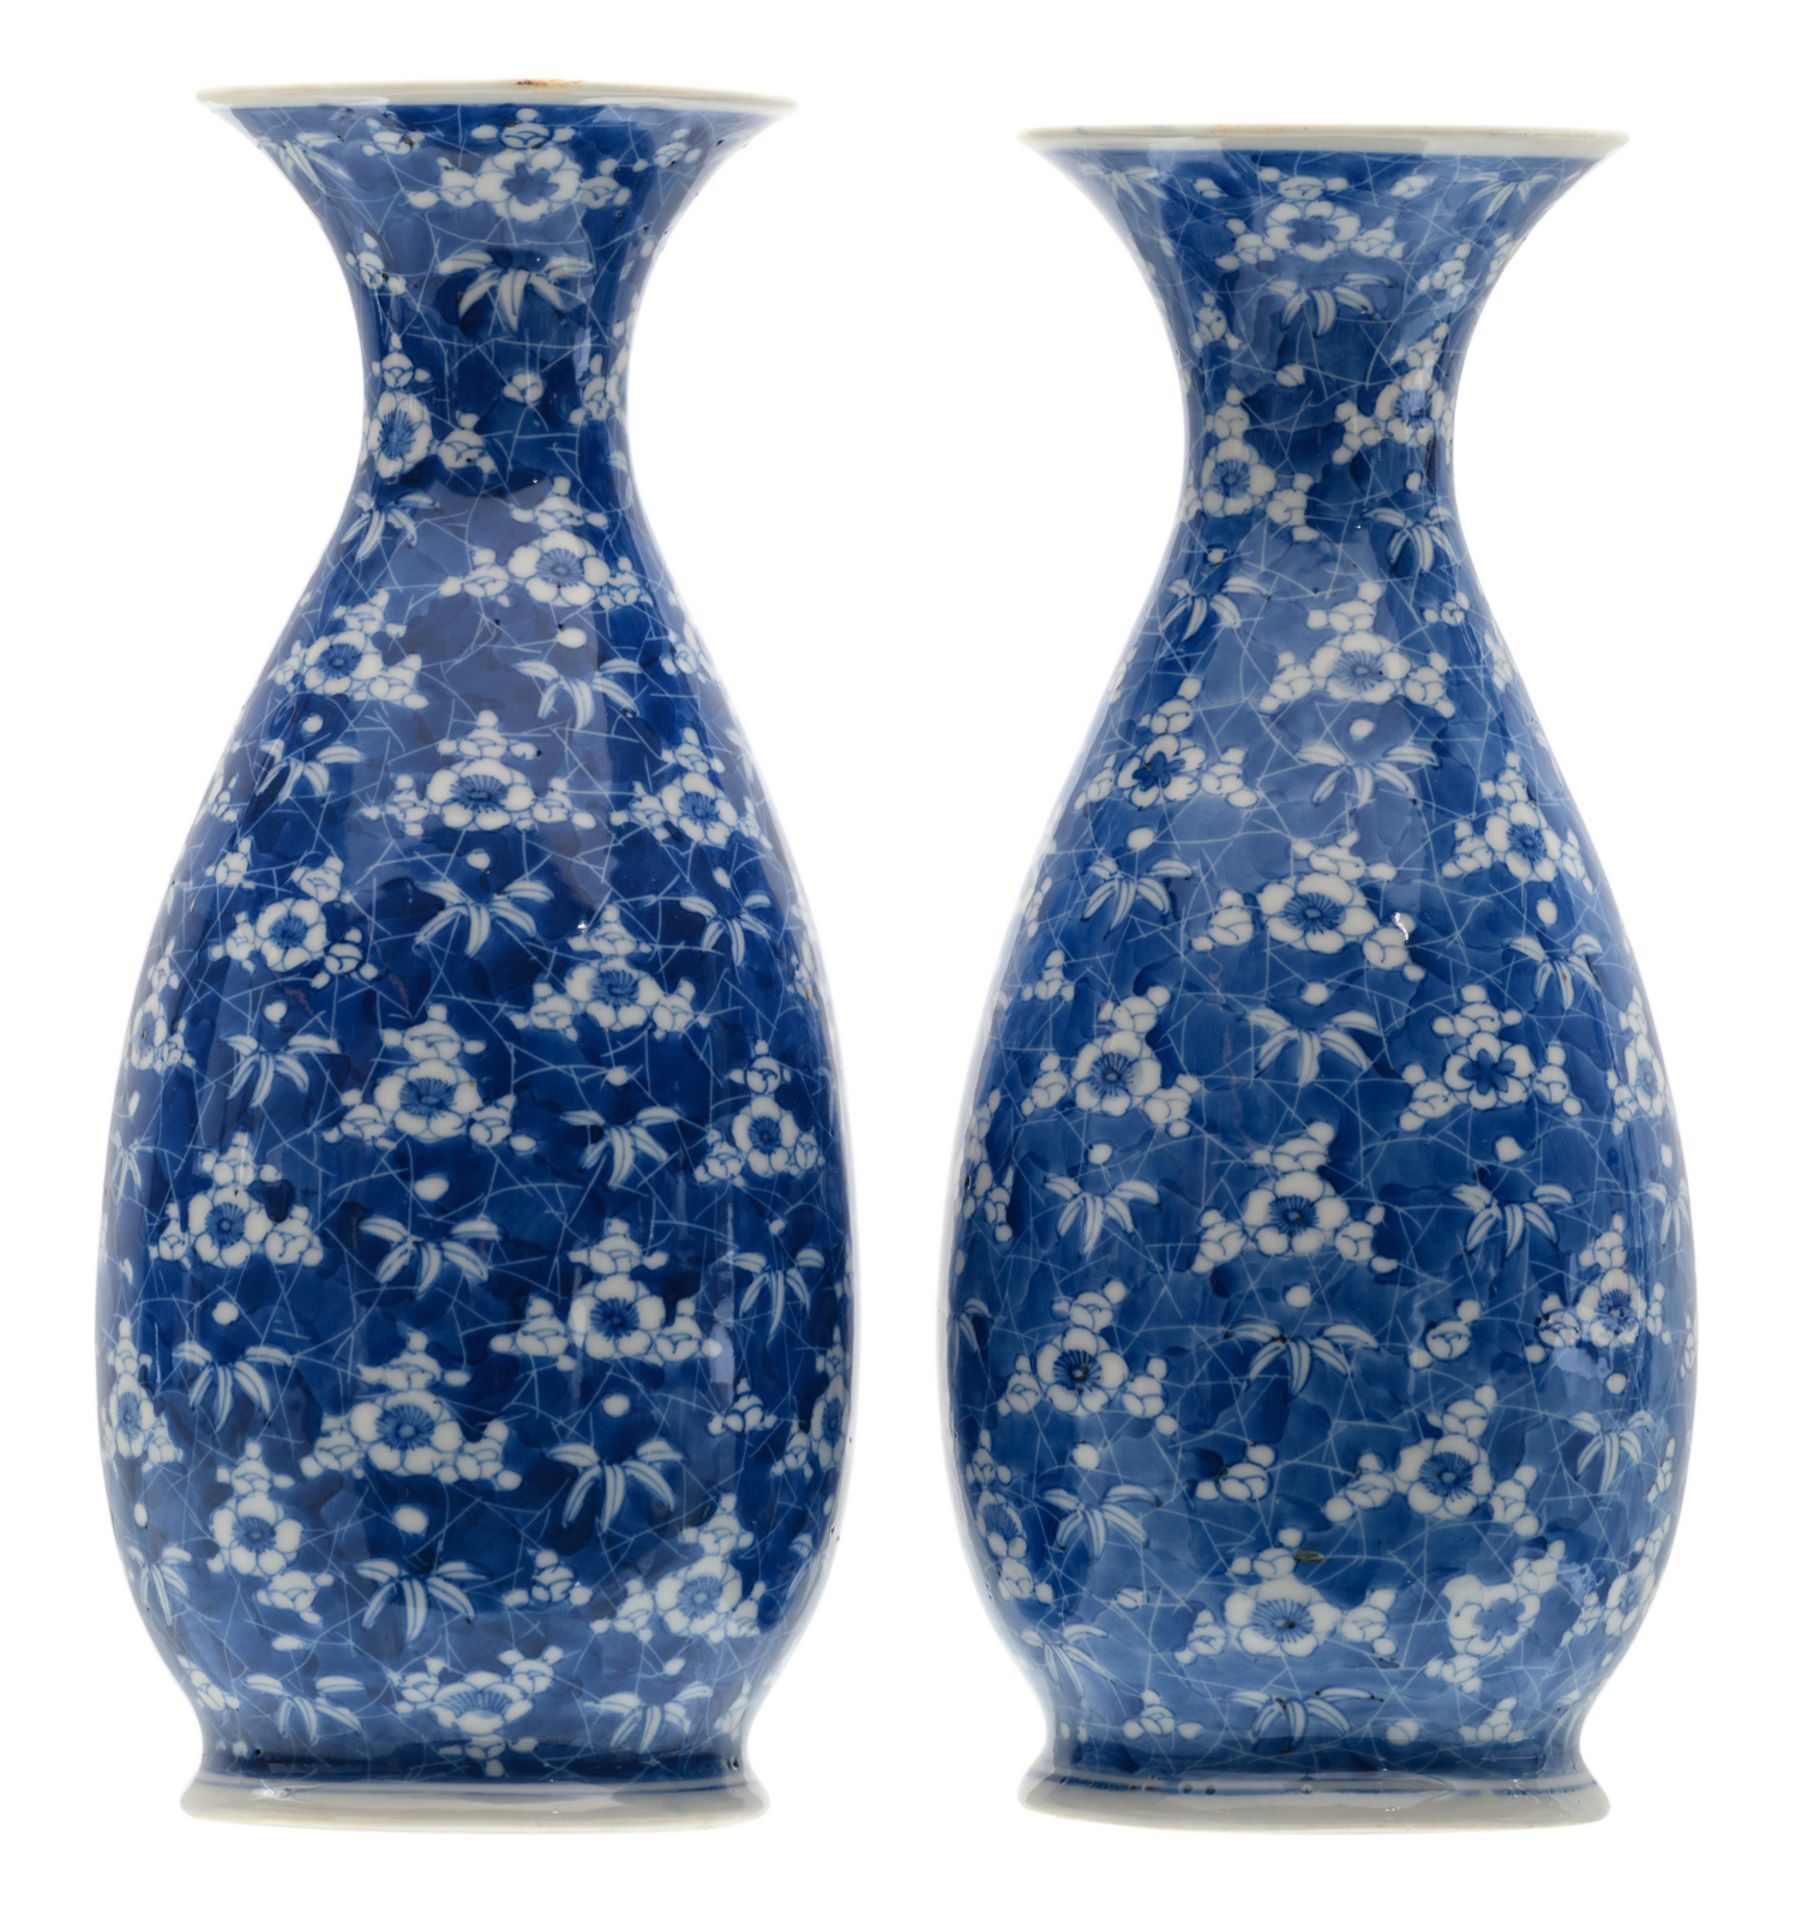 Two Japanese blue and white floral decorated vases, marked, Meiji and period, H 26 cm